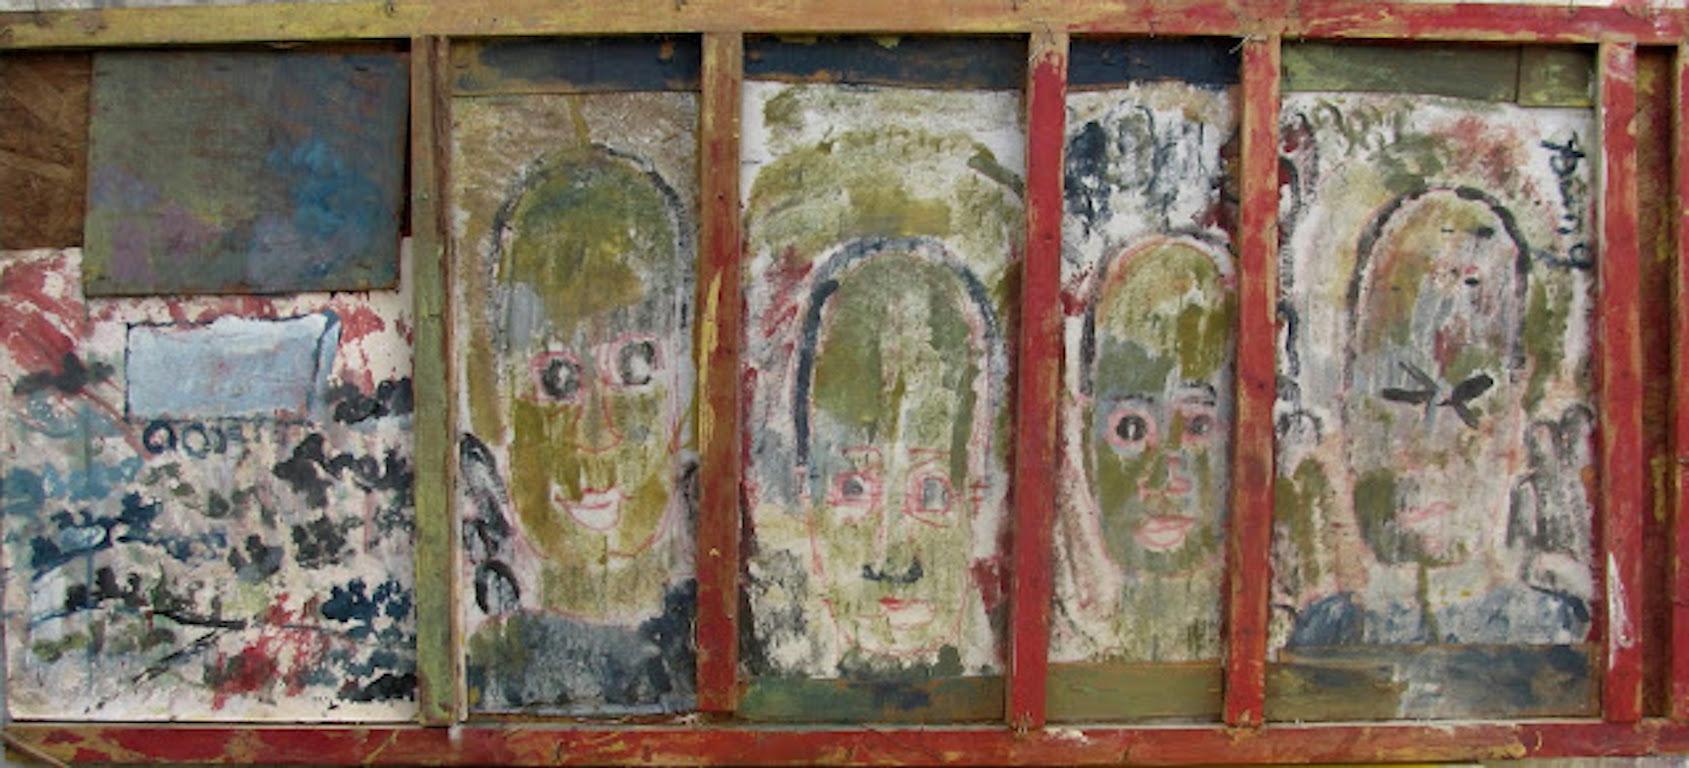 Painting on plywood of four heads and a truck by Purvis Young

From the artist to Vanity Novelty Garden, Tamara Hendershot To Rising Fawn Folk Art, The Jimmy Hedges Collection of Outsider Art 
